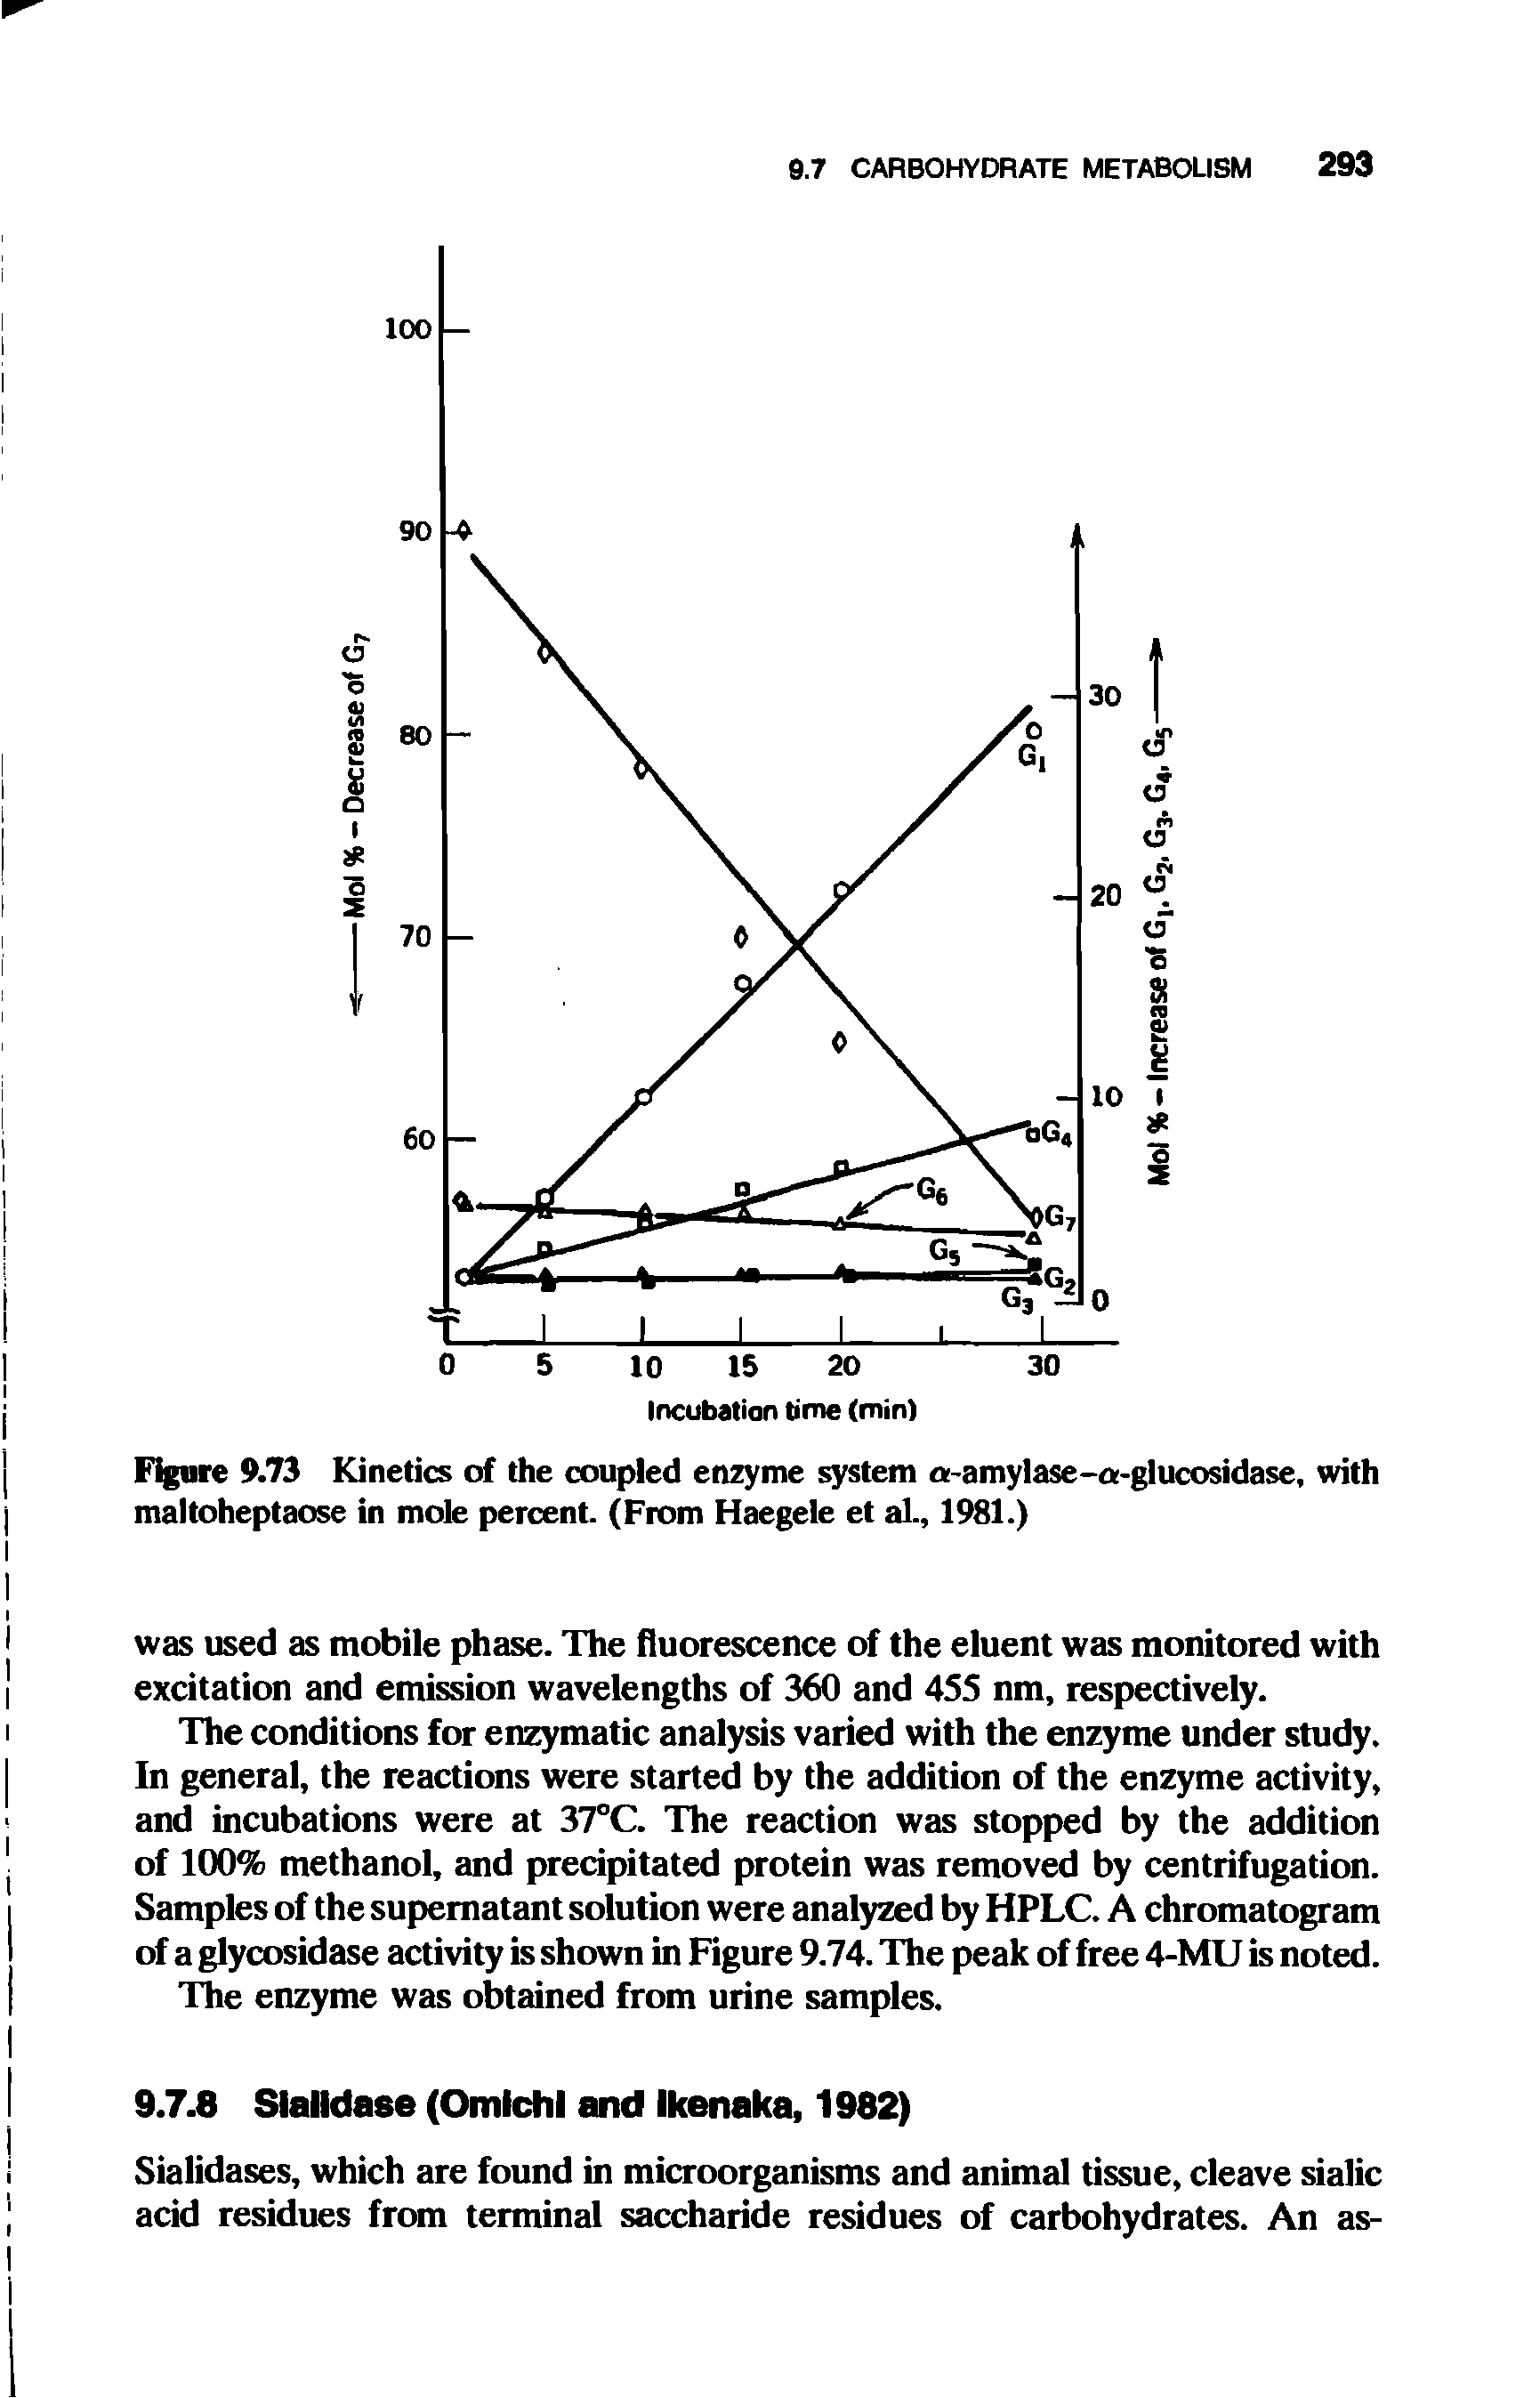 Figure 9.73 Kinetics of the coupled enzyme system a-amylase-a-glucosidase, with maltoheptaose in mole percent. (From Haegele et al., 1981.)...